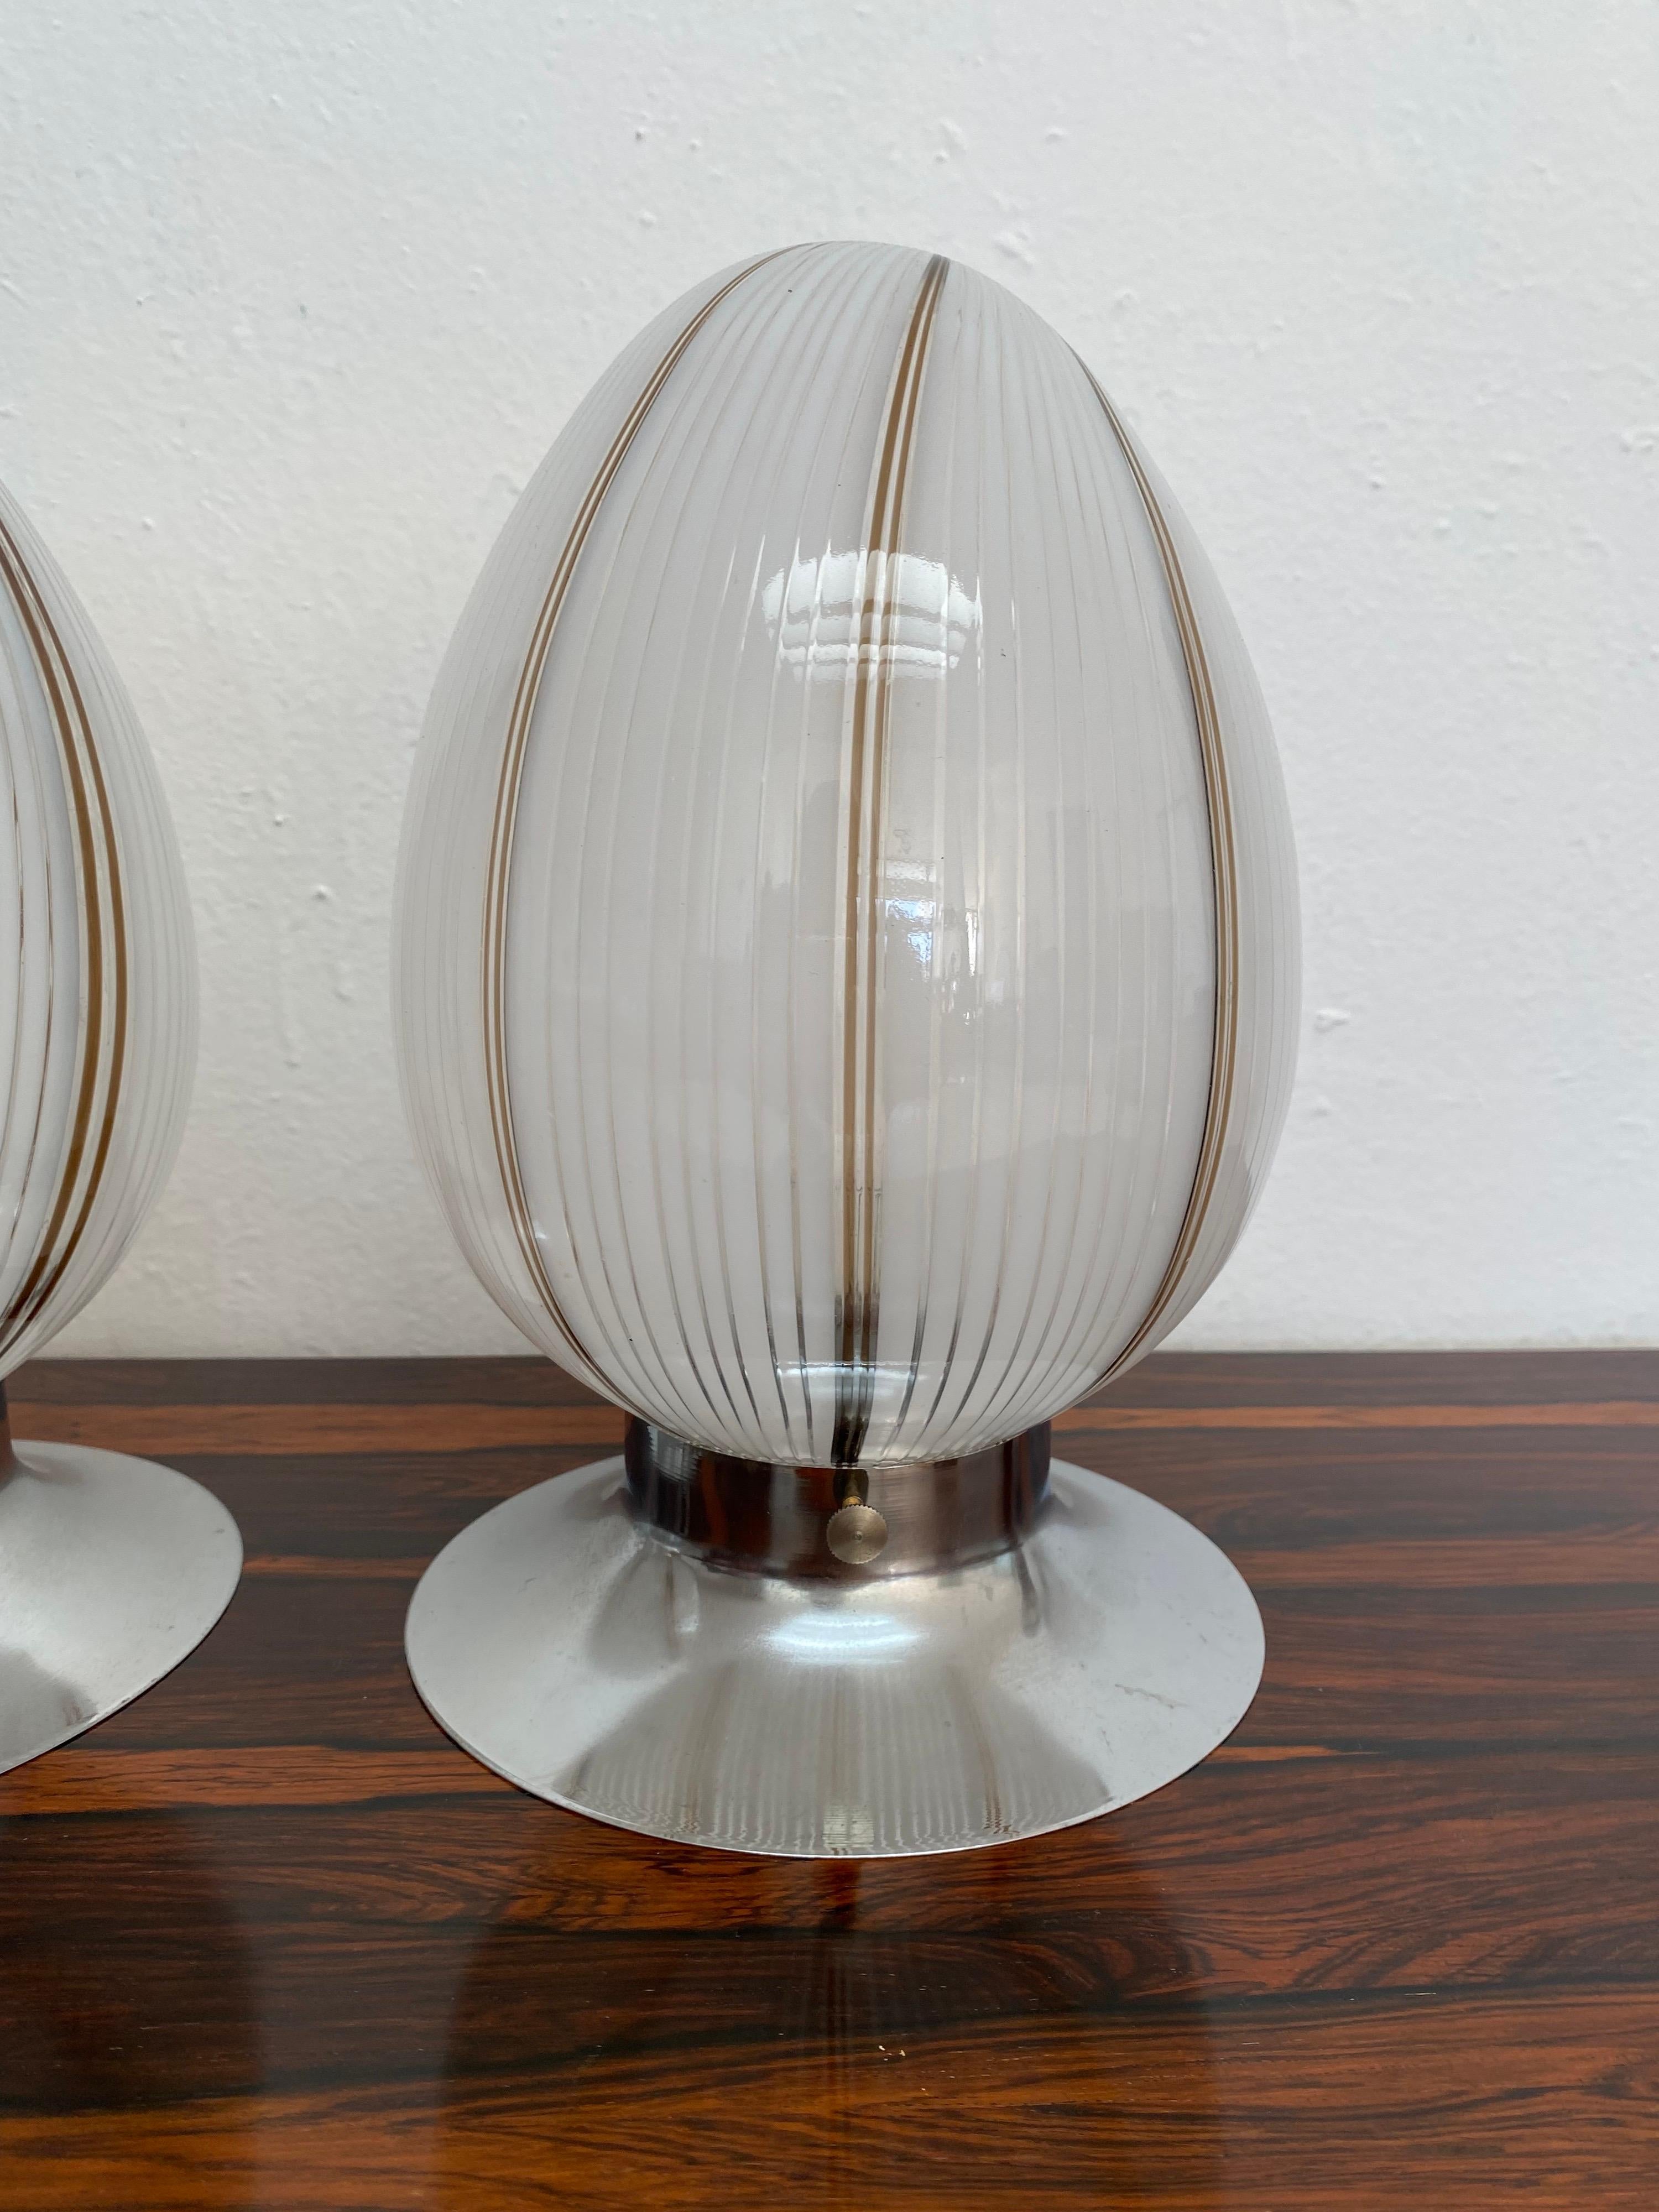 Pair of Mid-Century Modern Table Lamps Attributed to Venini, Murano, circa 1980 In Good Condition For Sale In Merida, Yucatan